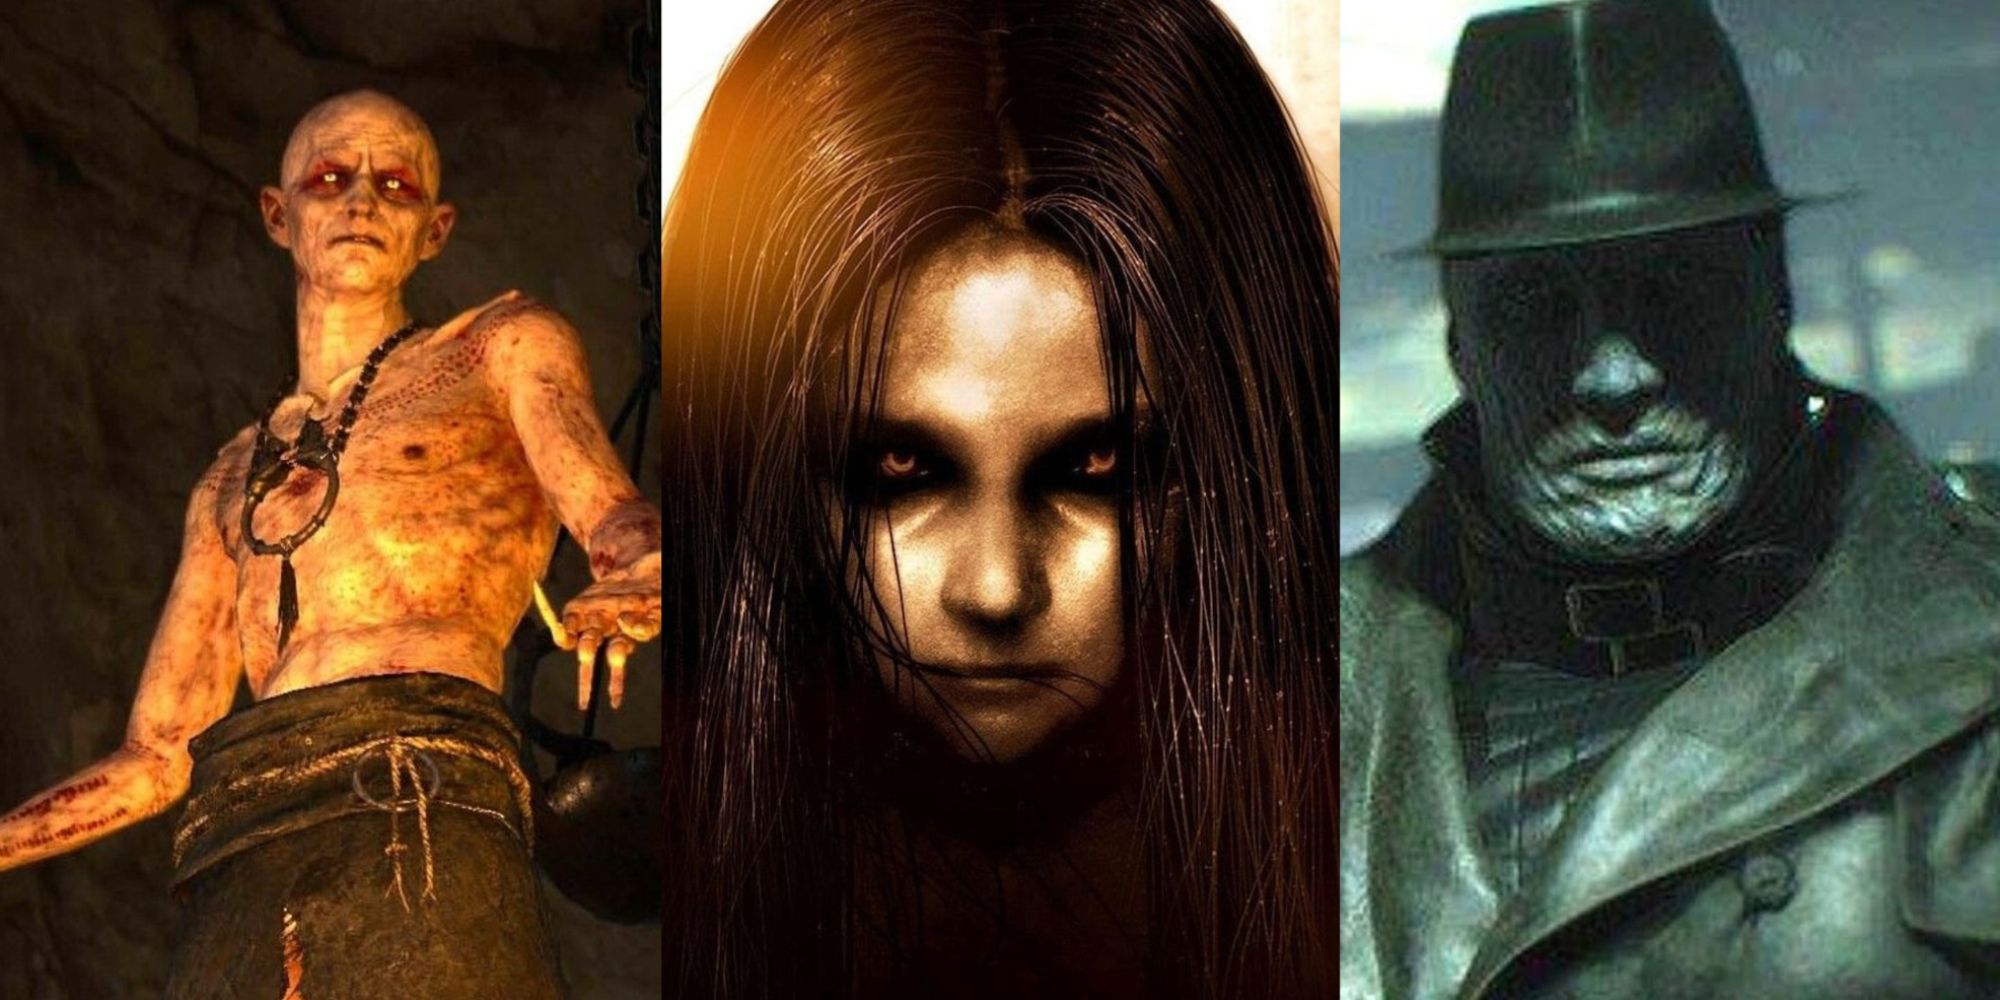 Scary Villains Featured Split Image The Witcher 3, Fear, and Resident Evil 2